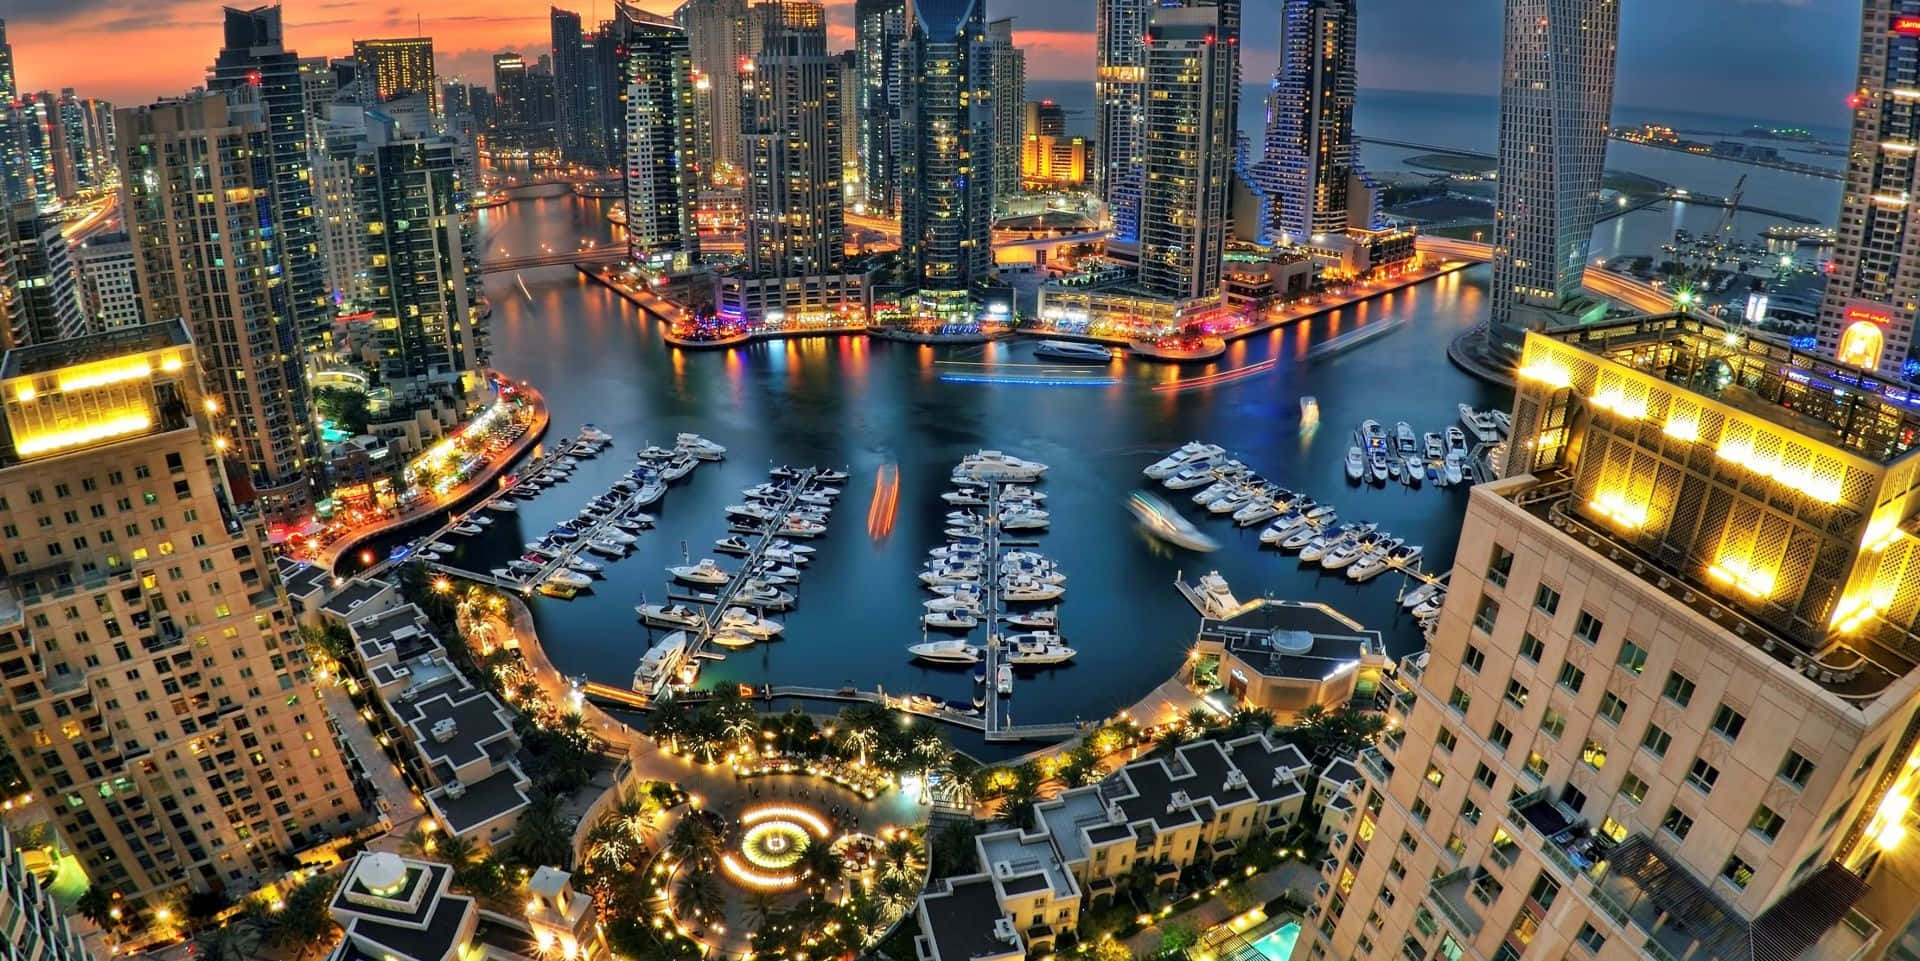 Take in the vibrant hustle and bustle of Dubai